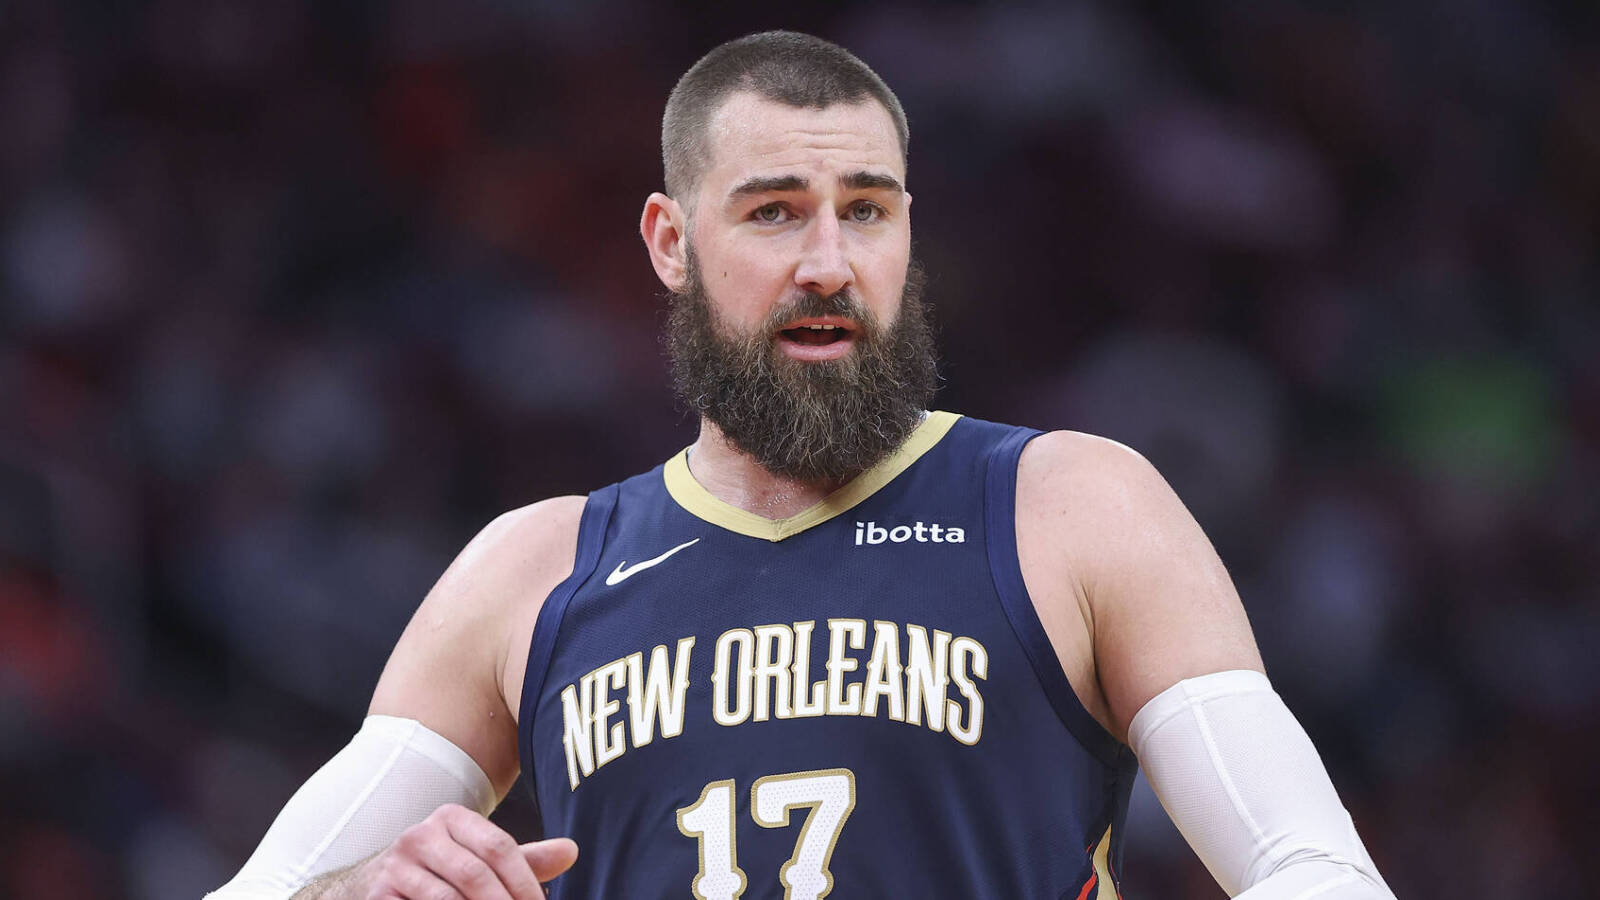 NBA player's resemblance to Travis Kelce has now become a meme